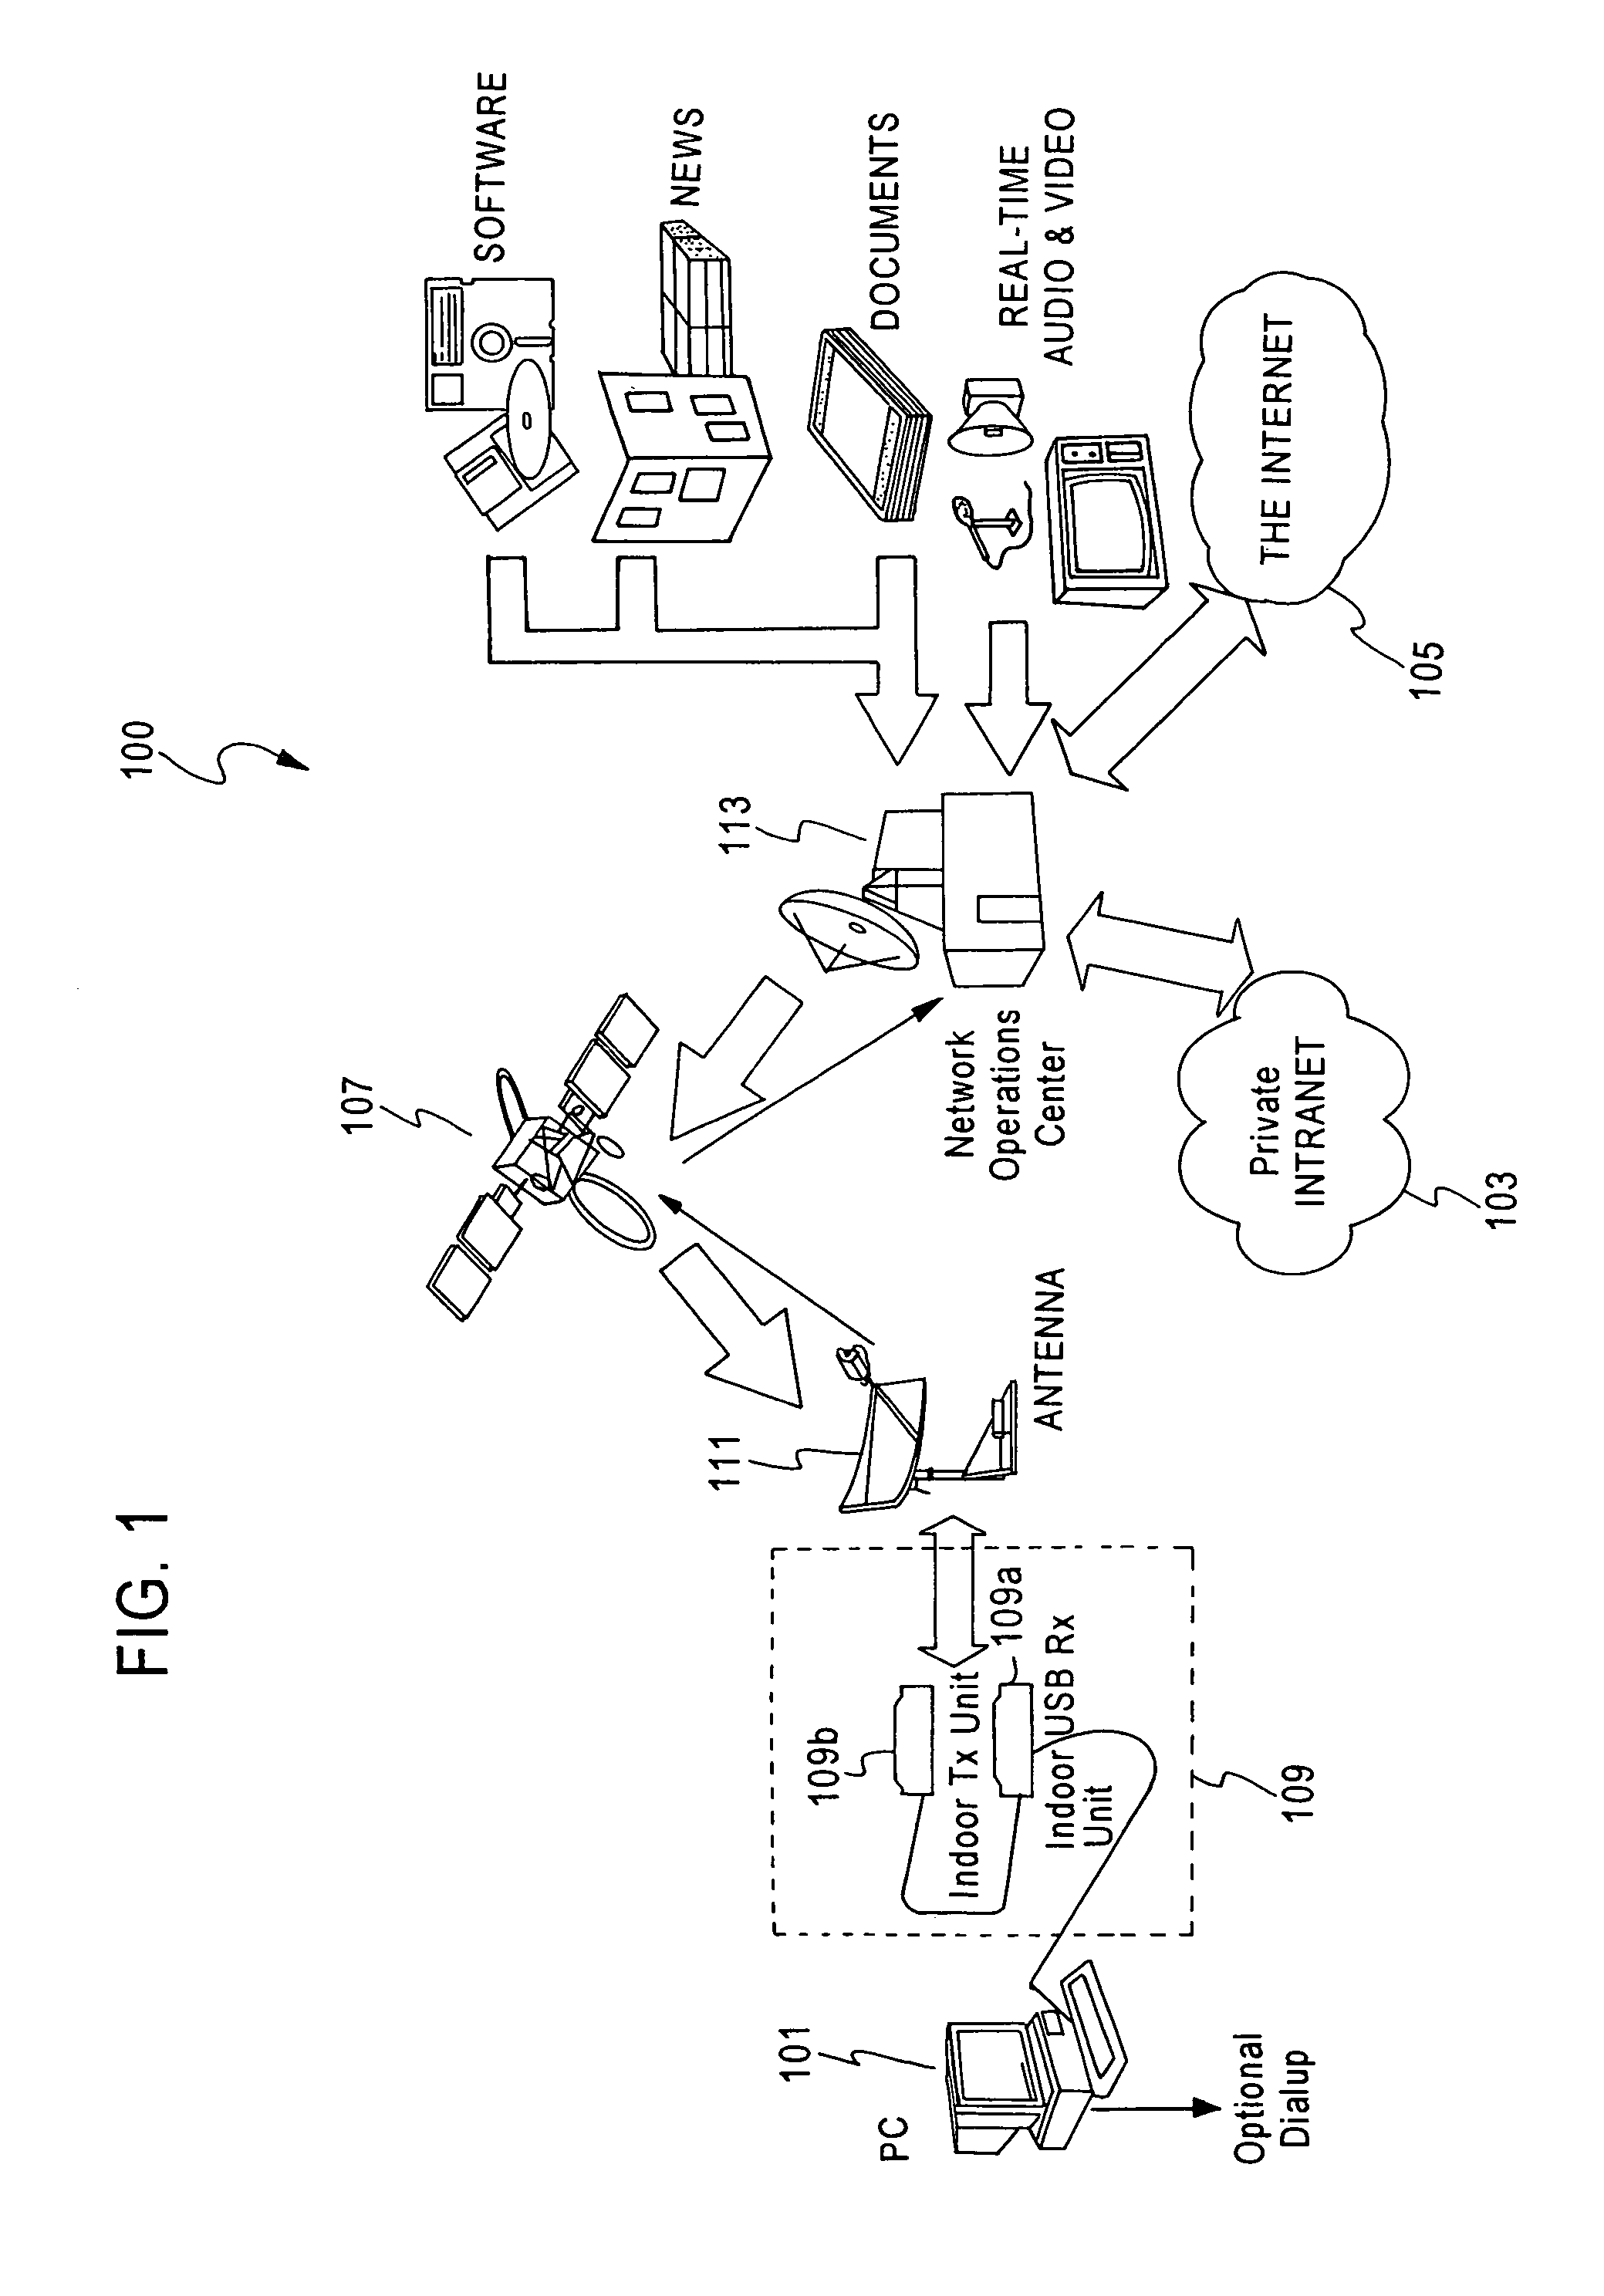 System and method for managing bandwidth in a two-way satellite system